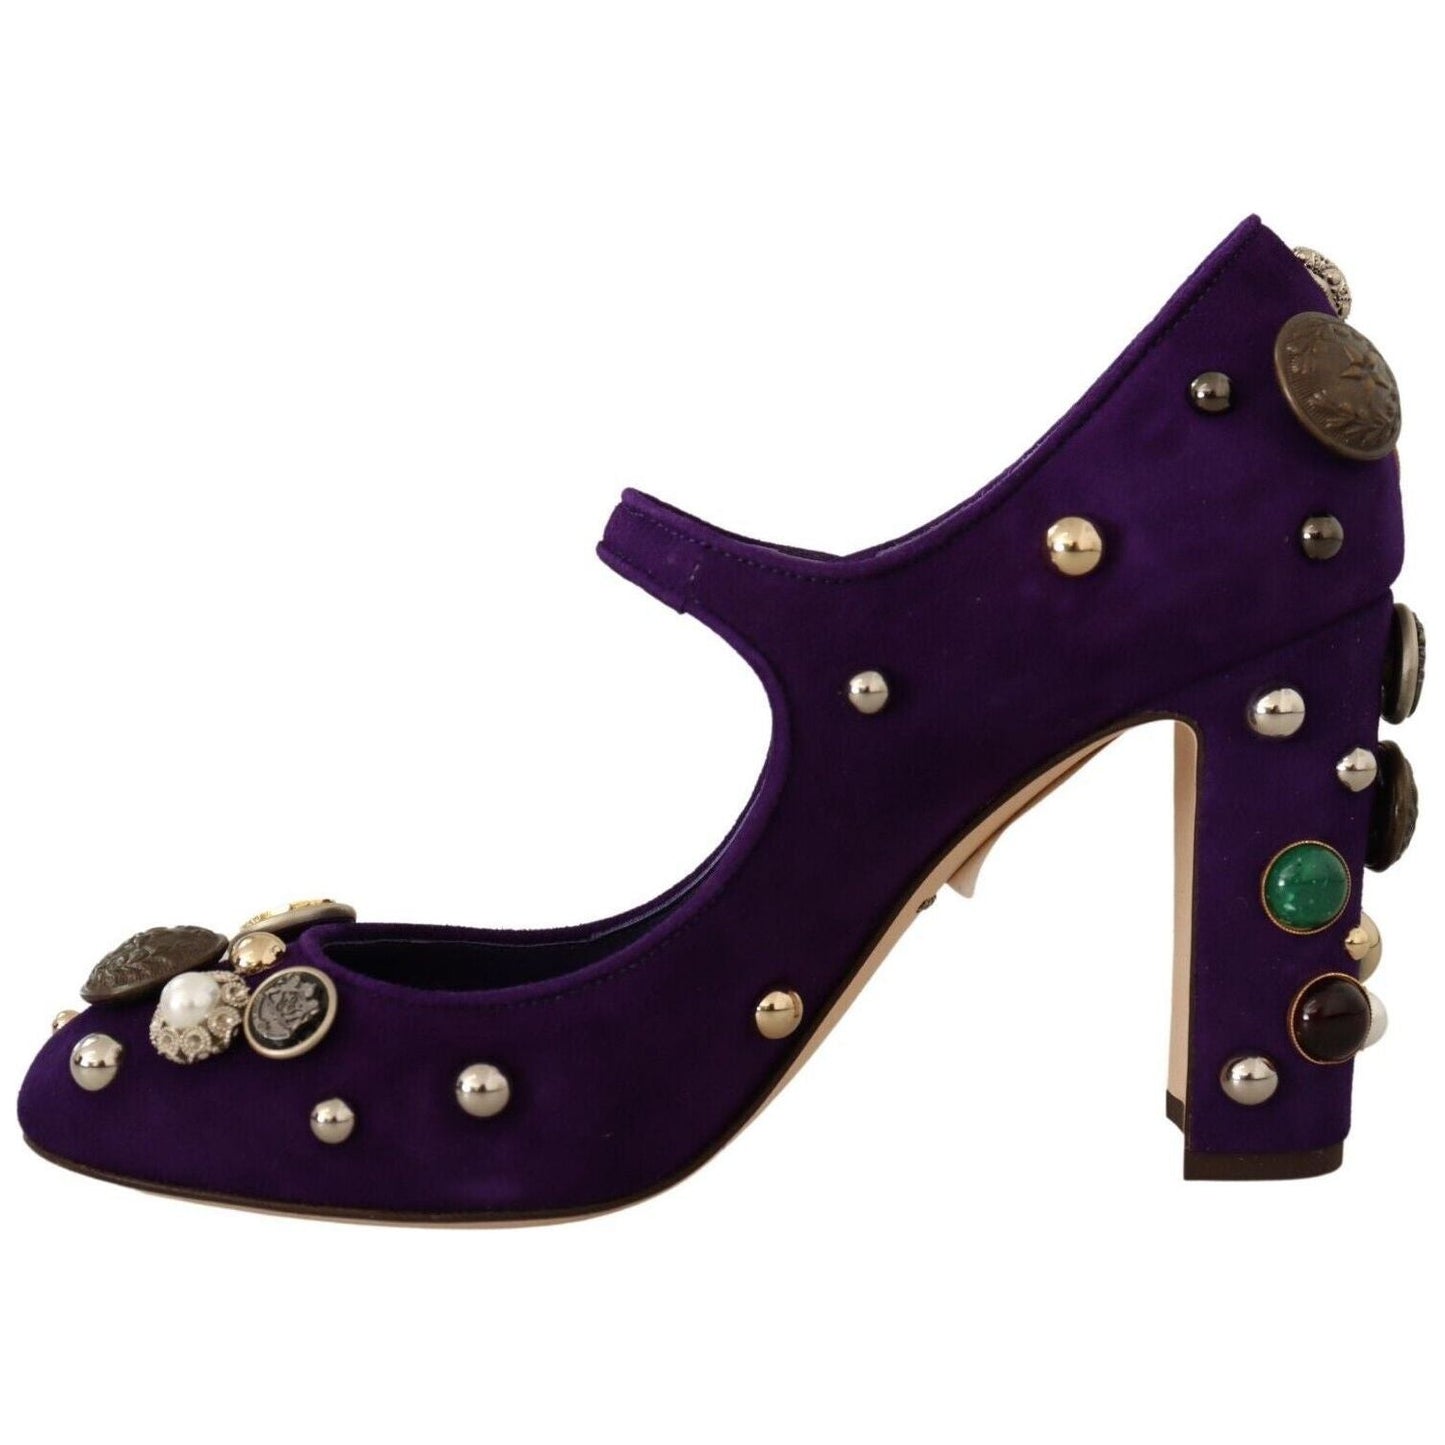 Dolce & Gabbana Elegant Suede Heels with Jewel Buttons Pumps purple-suede-embellished-pump-mary-jane-shoes s-l1600-2022-11-15T160654.524-36bf4a38-c3d.jpg